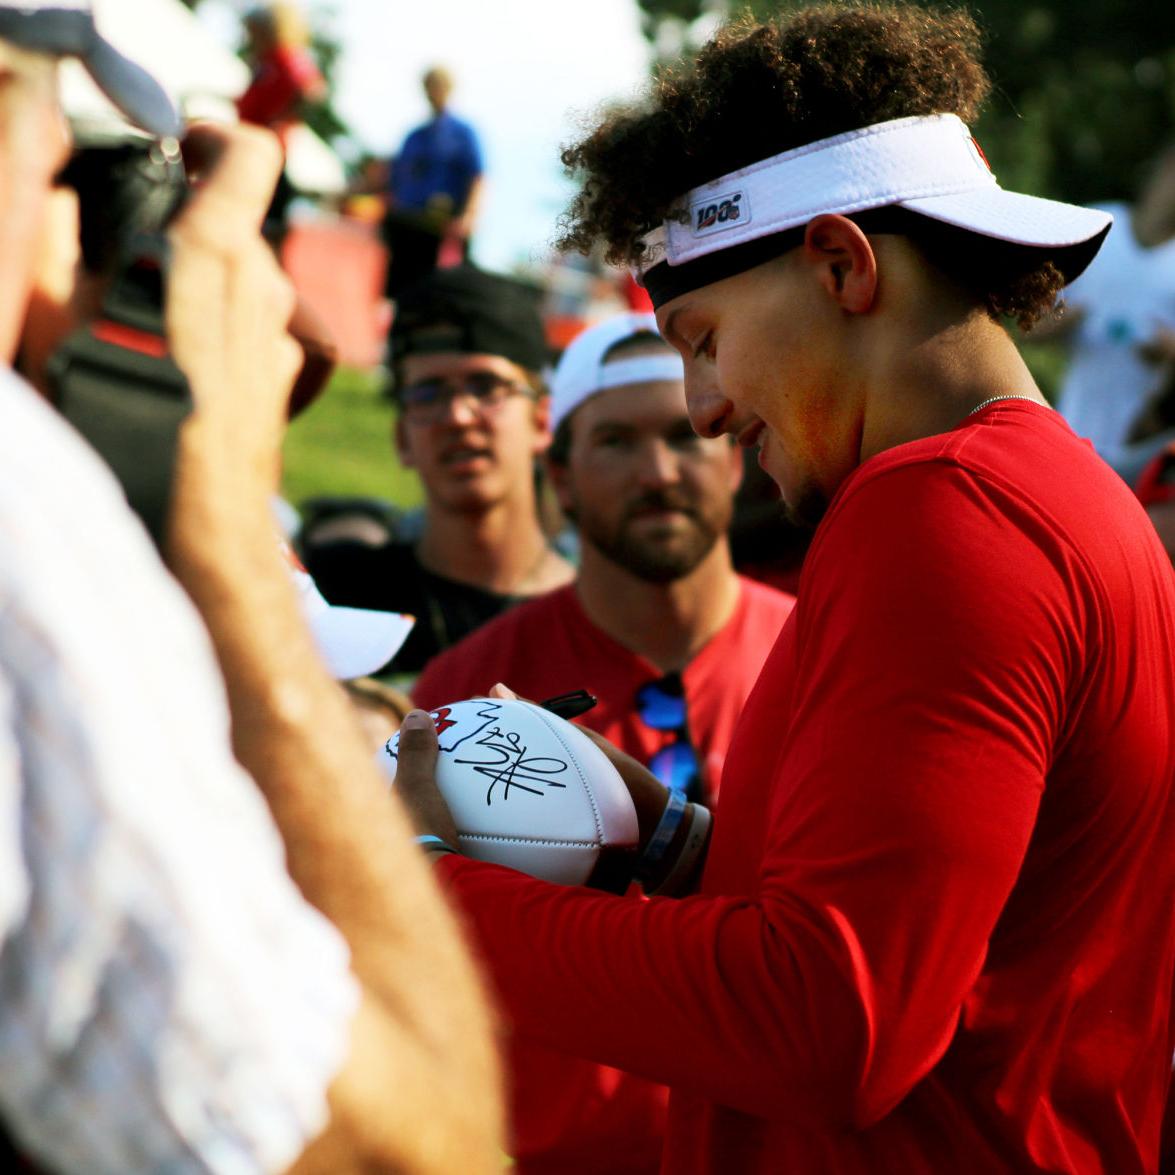 Mahomes living up to 'Showtime